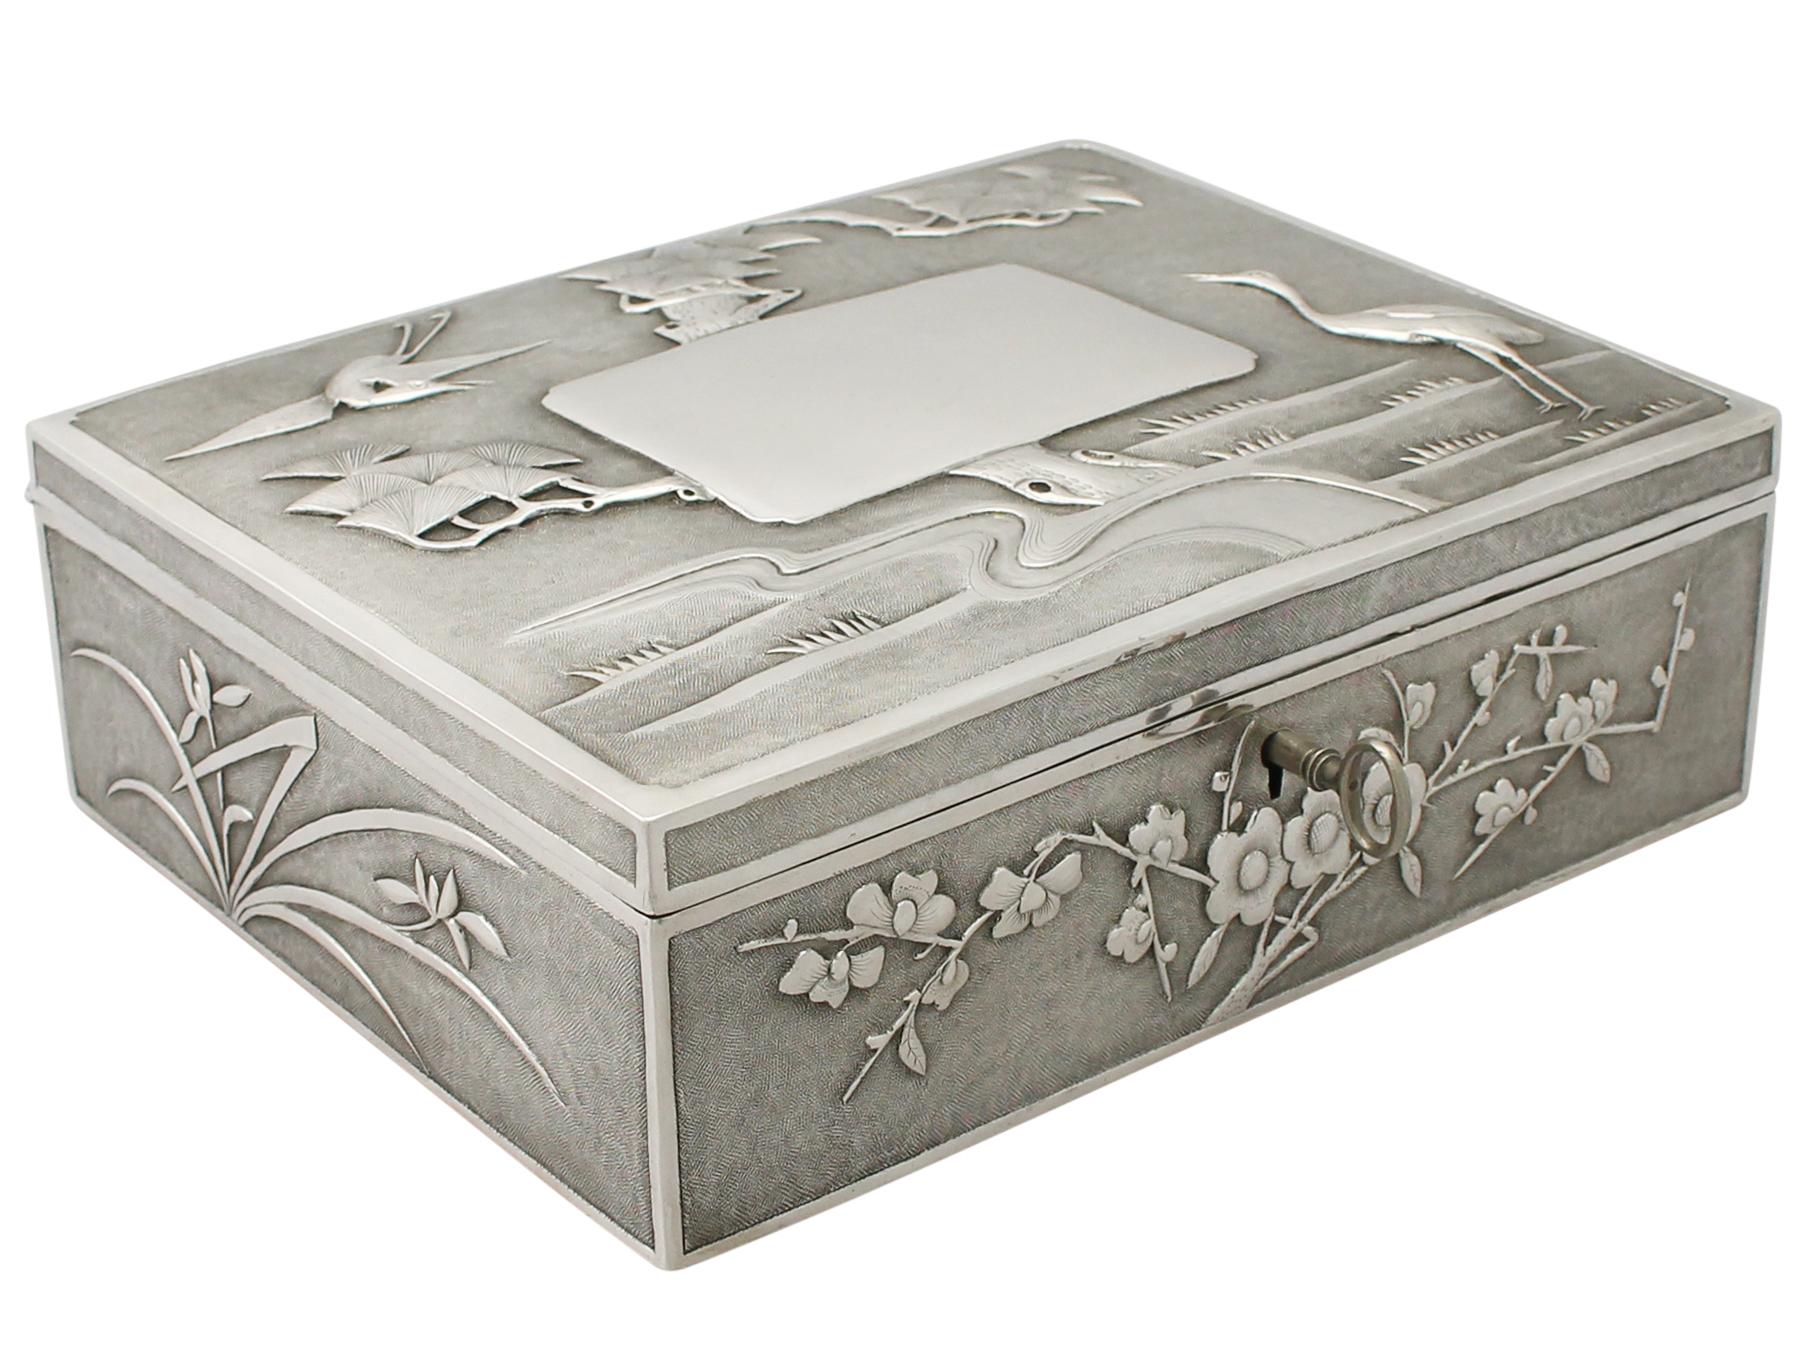 Antique 1890s Chinese Export Silver Locking Box In Excellent Condition For Sale In Jesmond, Newcastle Upon Tyne